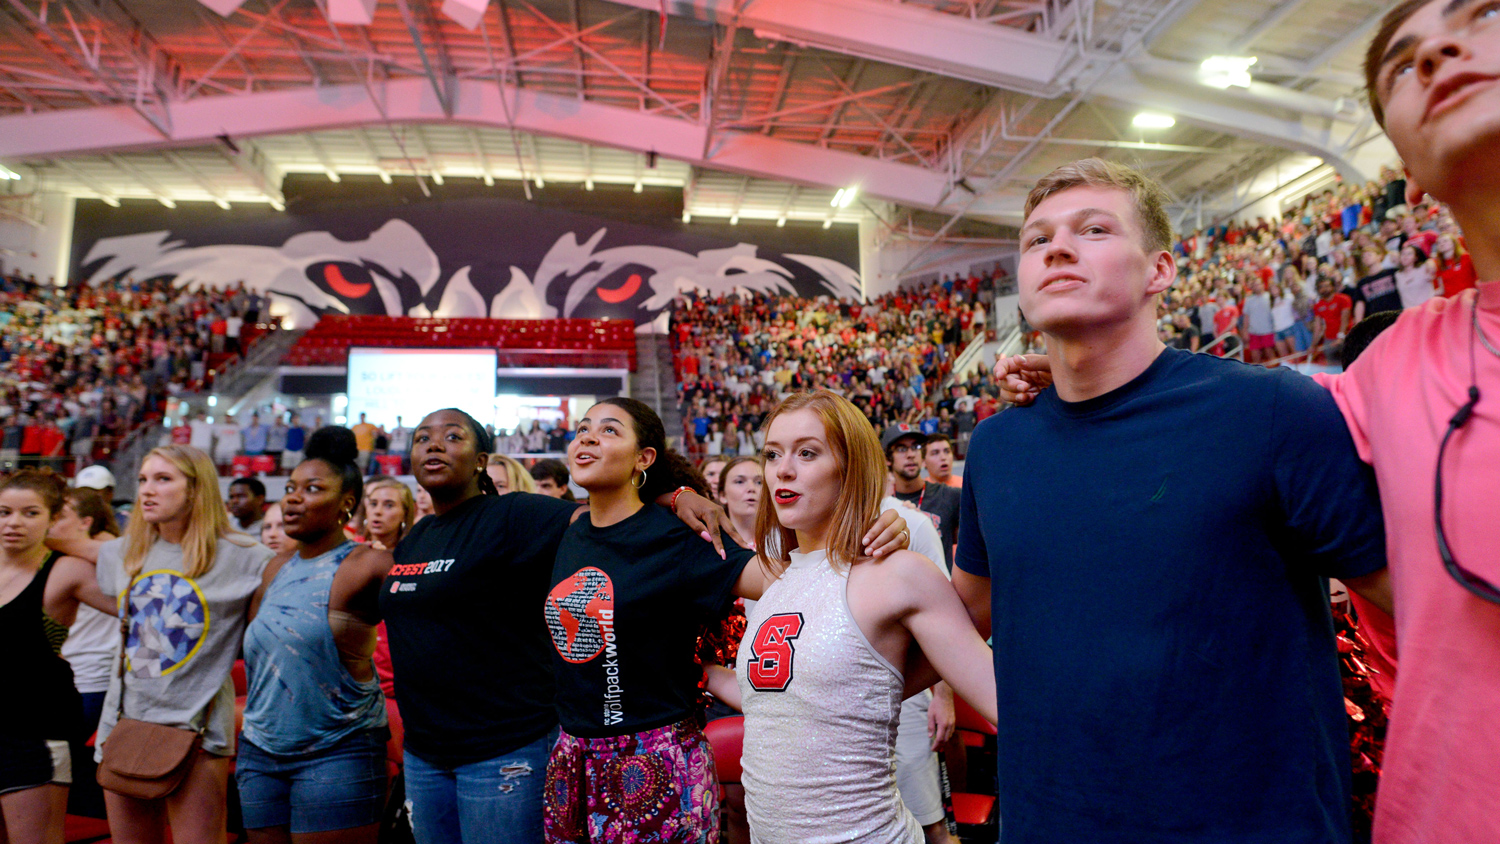 Students in Reynolds Coliseum